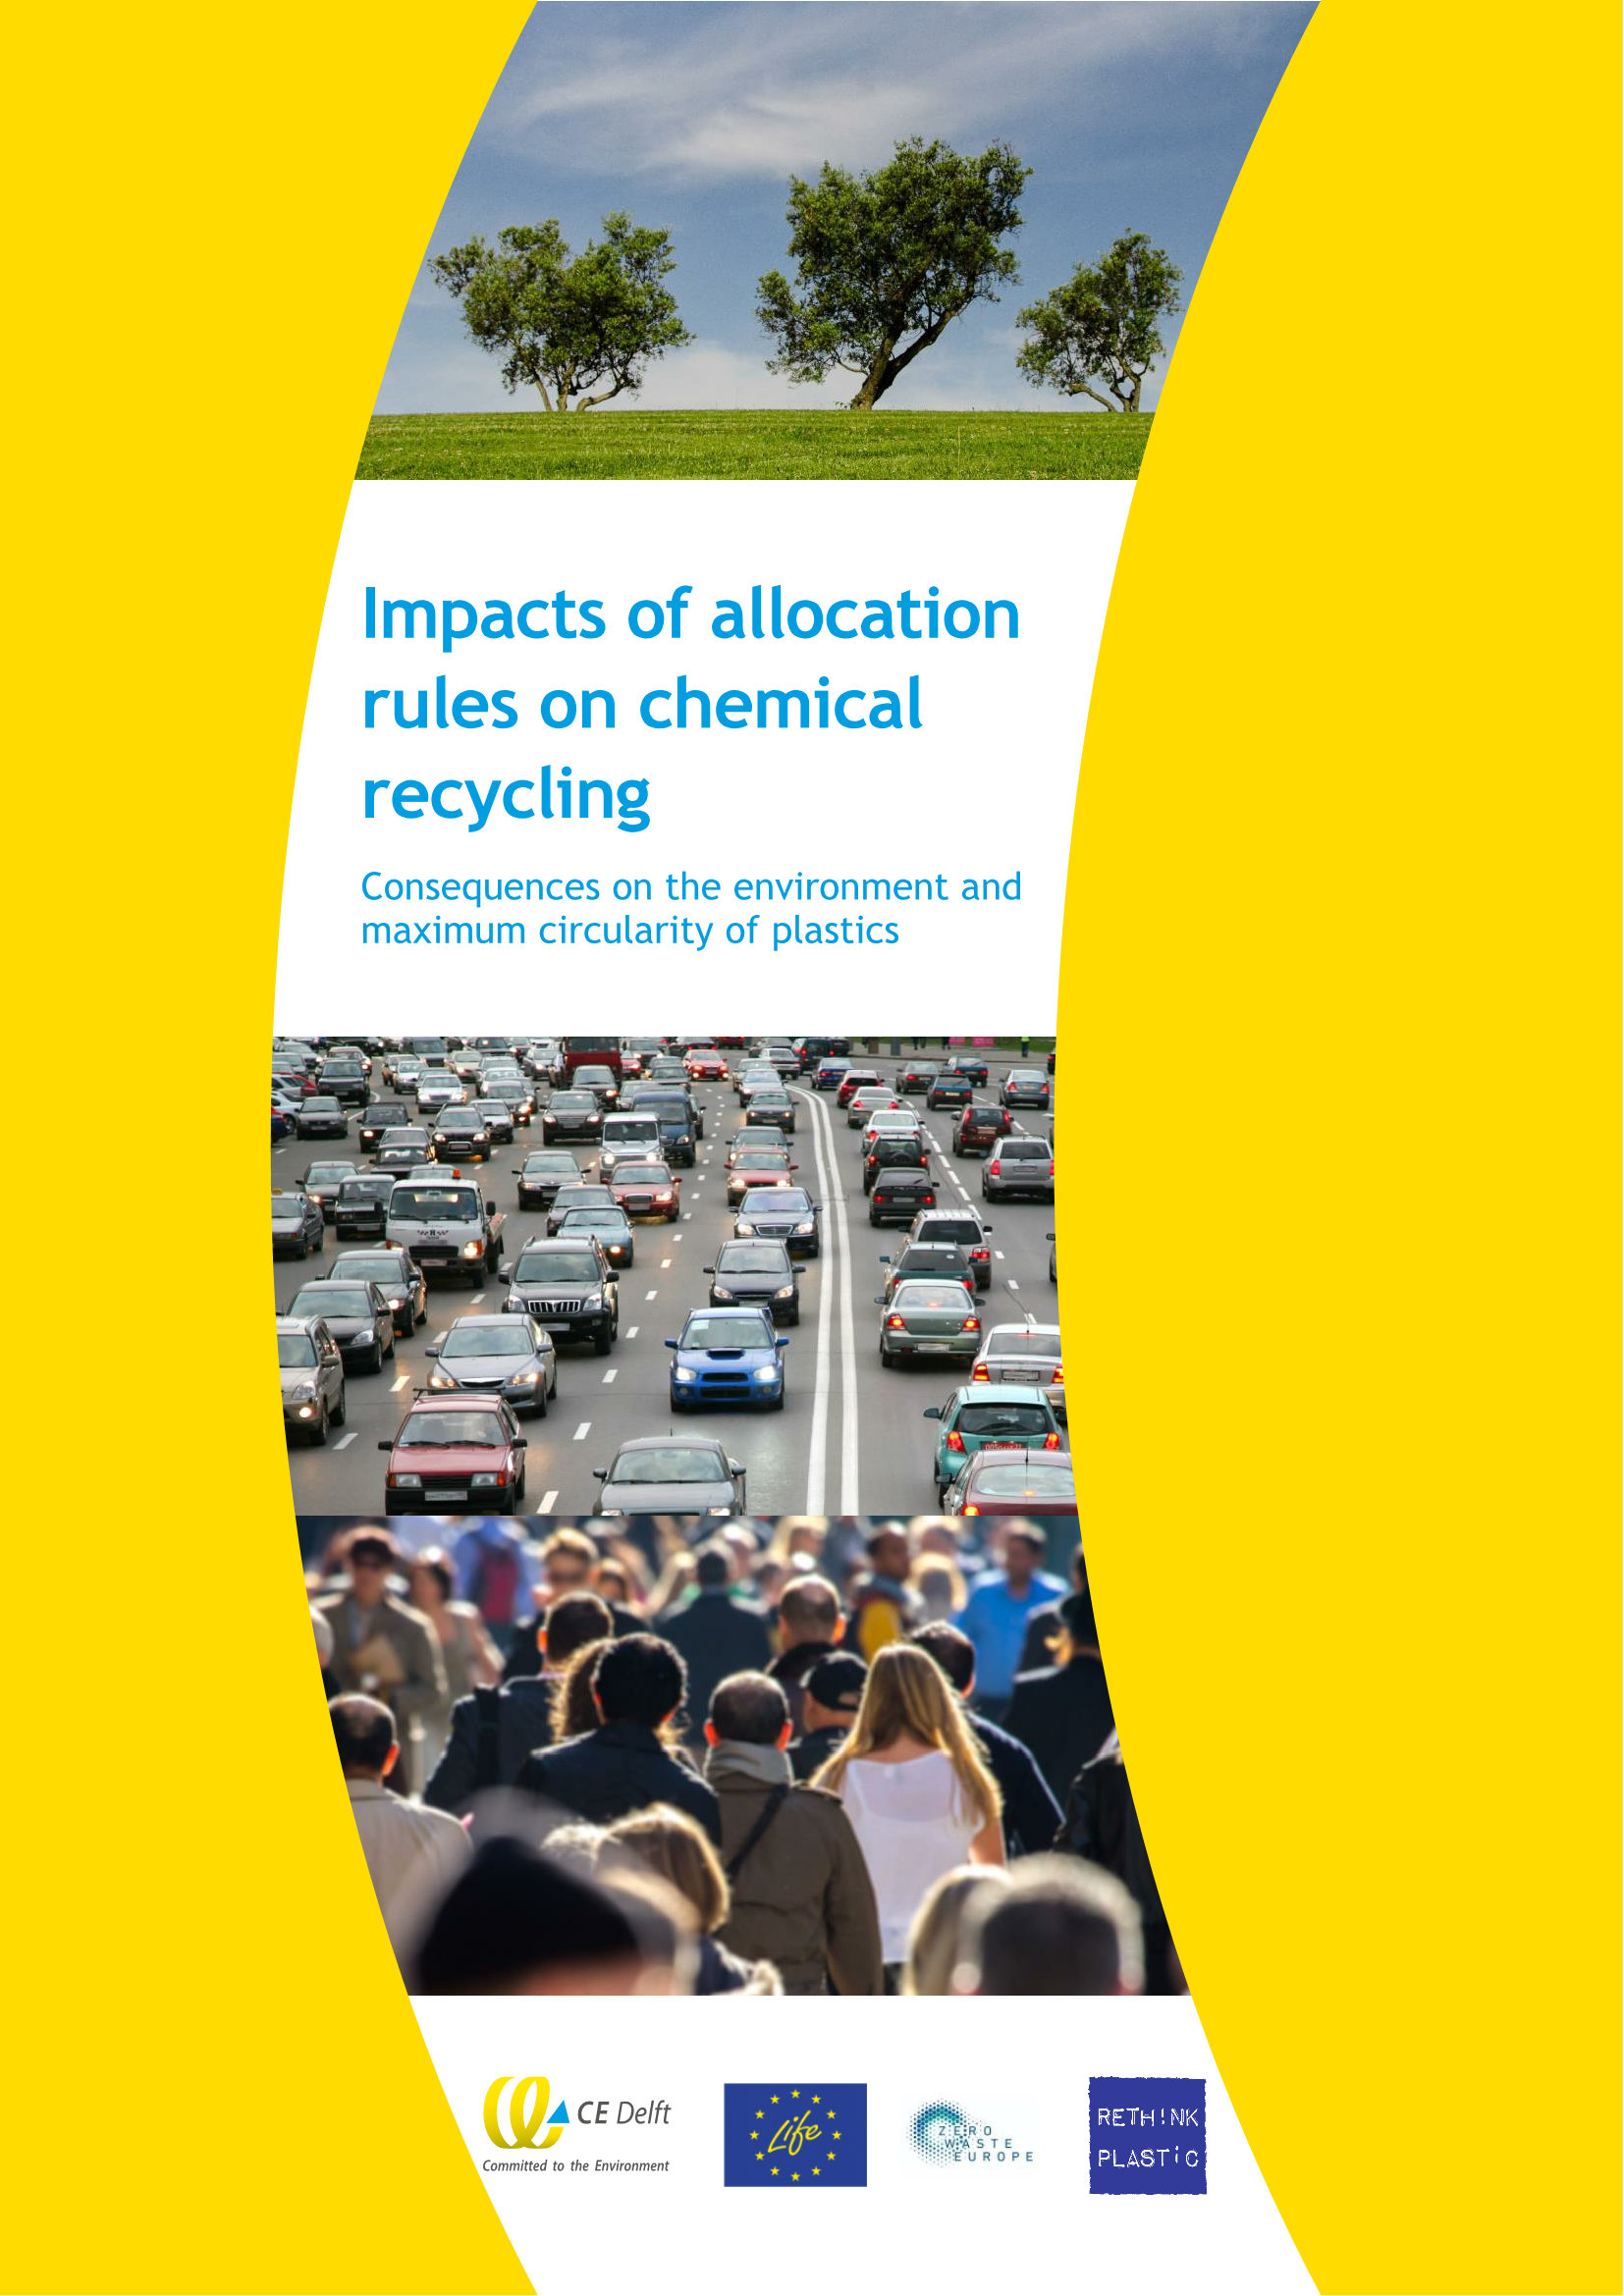 Impacts of allocation rules on chemical recycling – consequences on the environment and maximum circularity of plastics